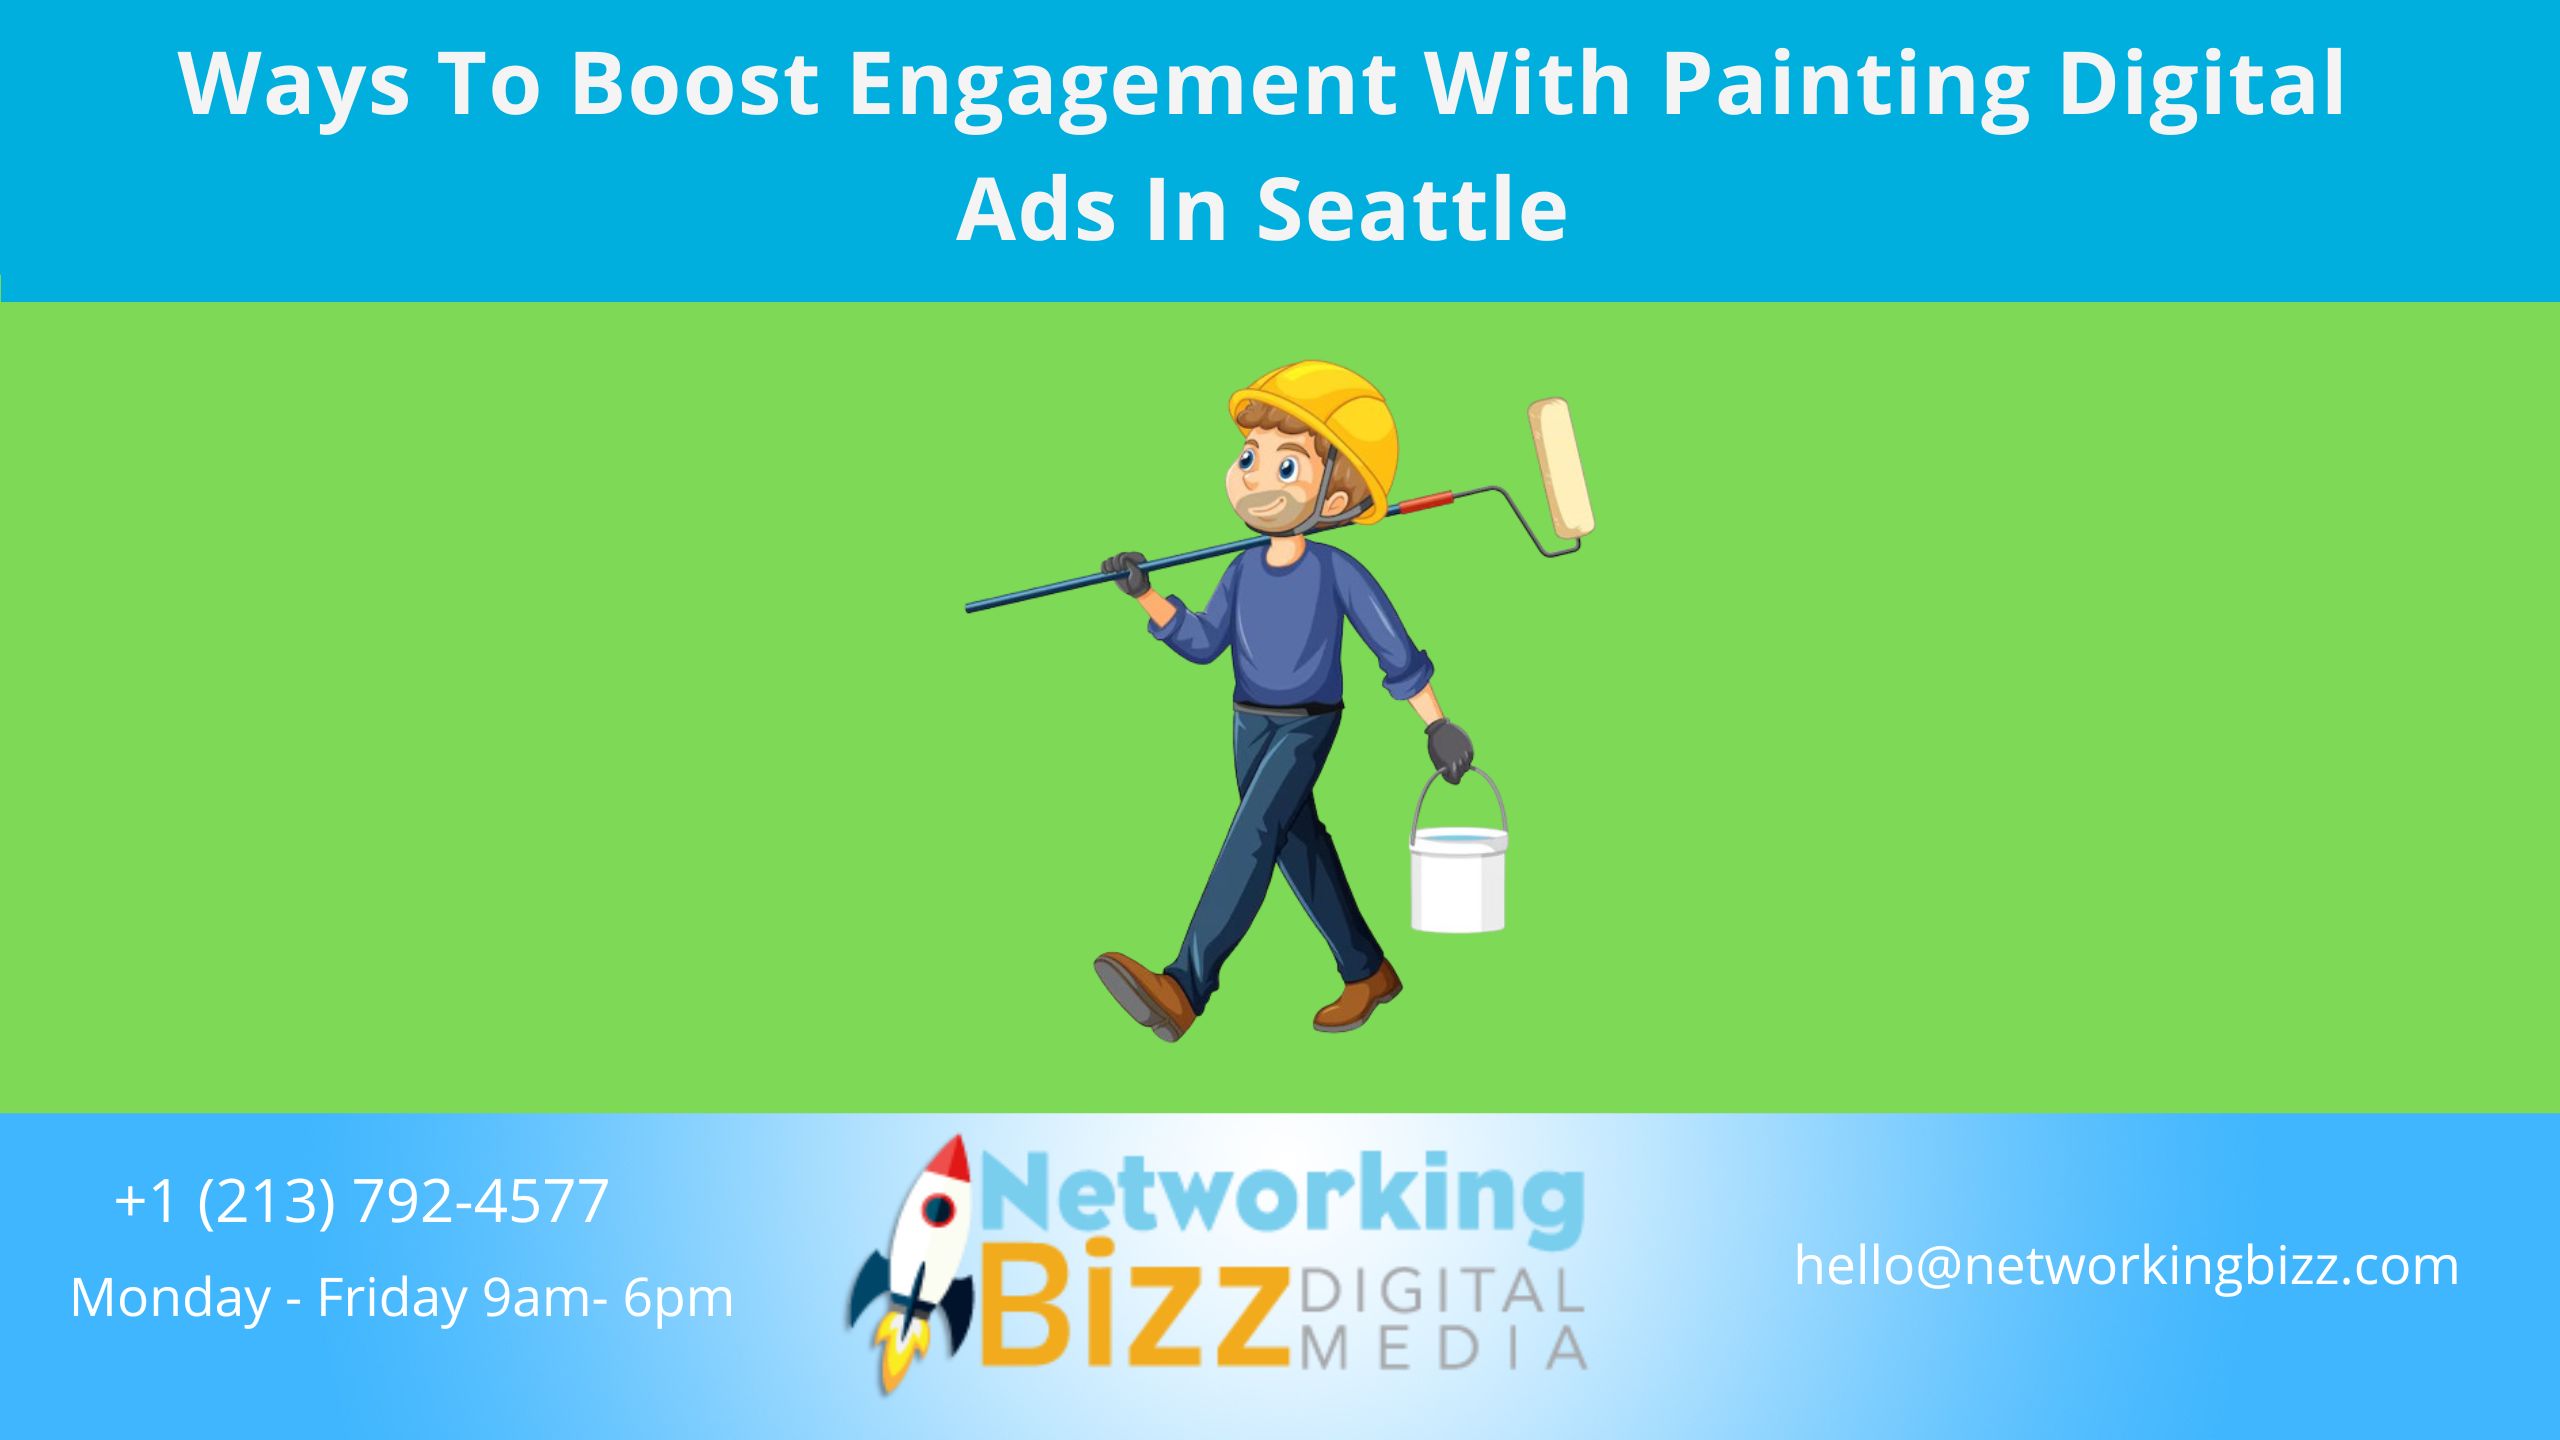 Ways To Boost Engagement With Painting Digital Ads In Seattle